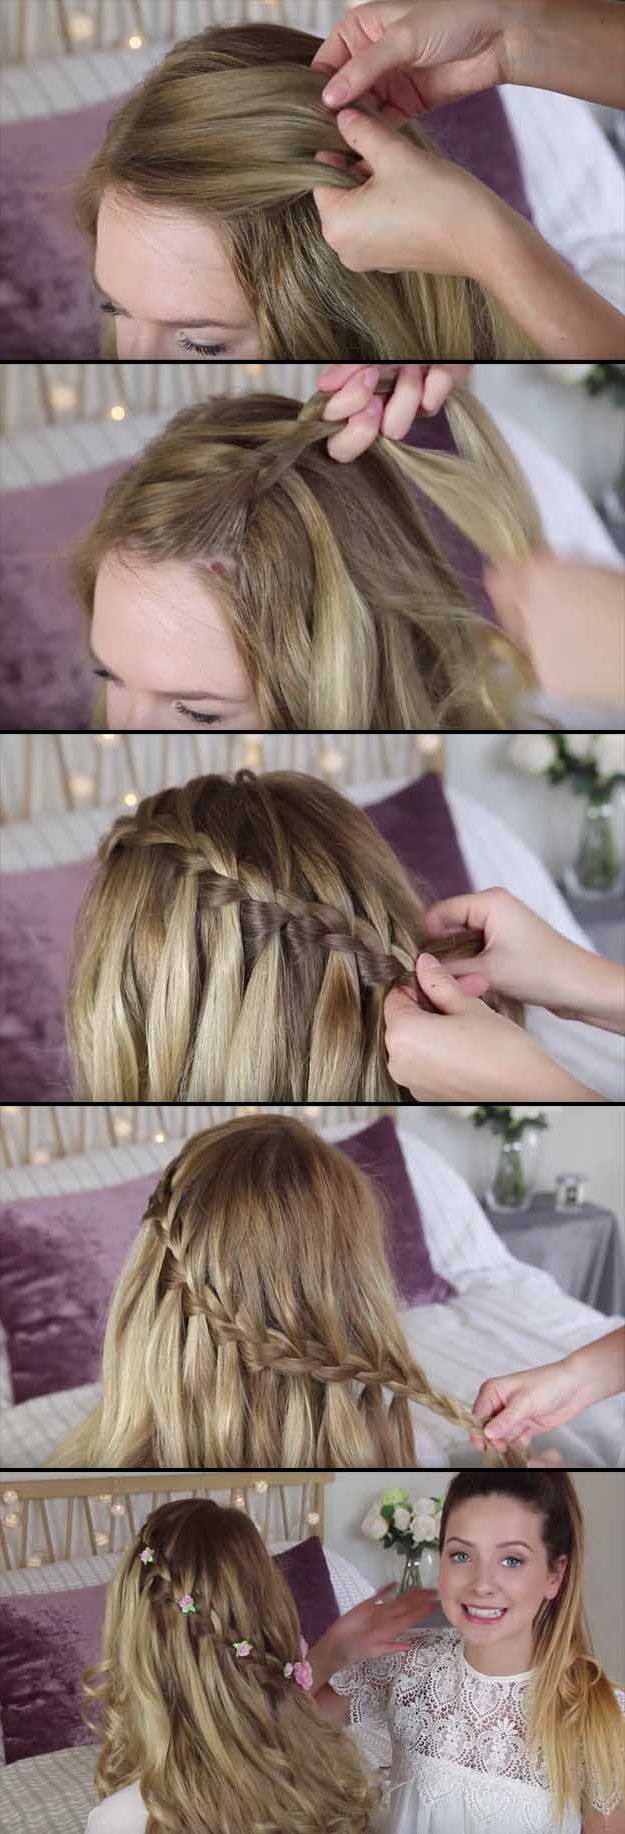 24 Beautiful Bridesmaid Hairstyles For Any Wedding – The Goddess For Short Hairstyles For Bridesmaids (View 16 of 25)